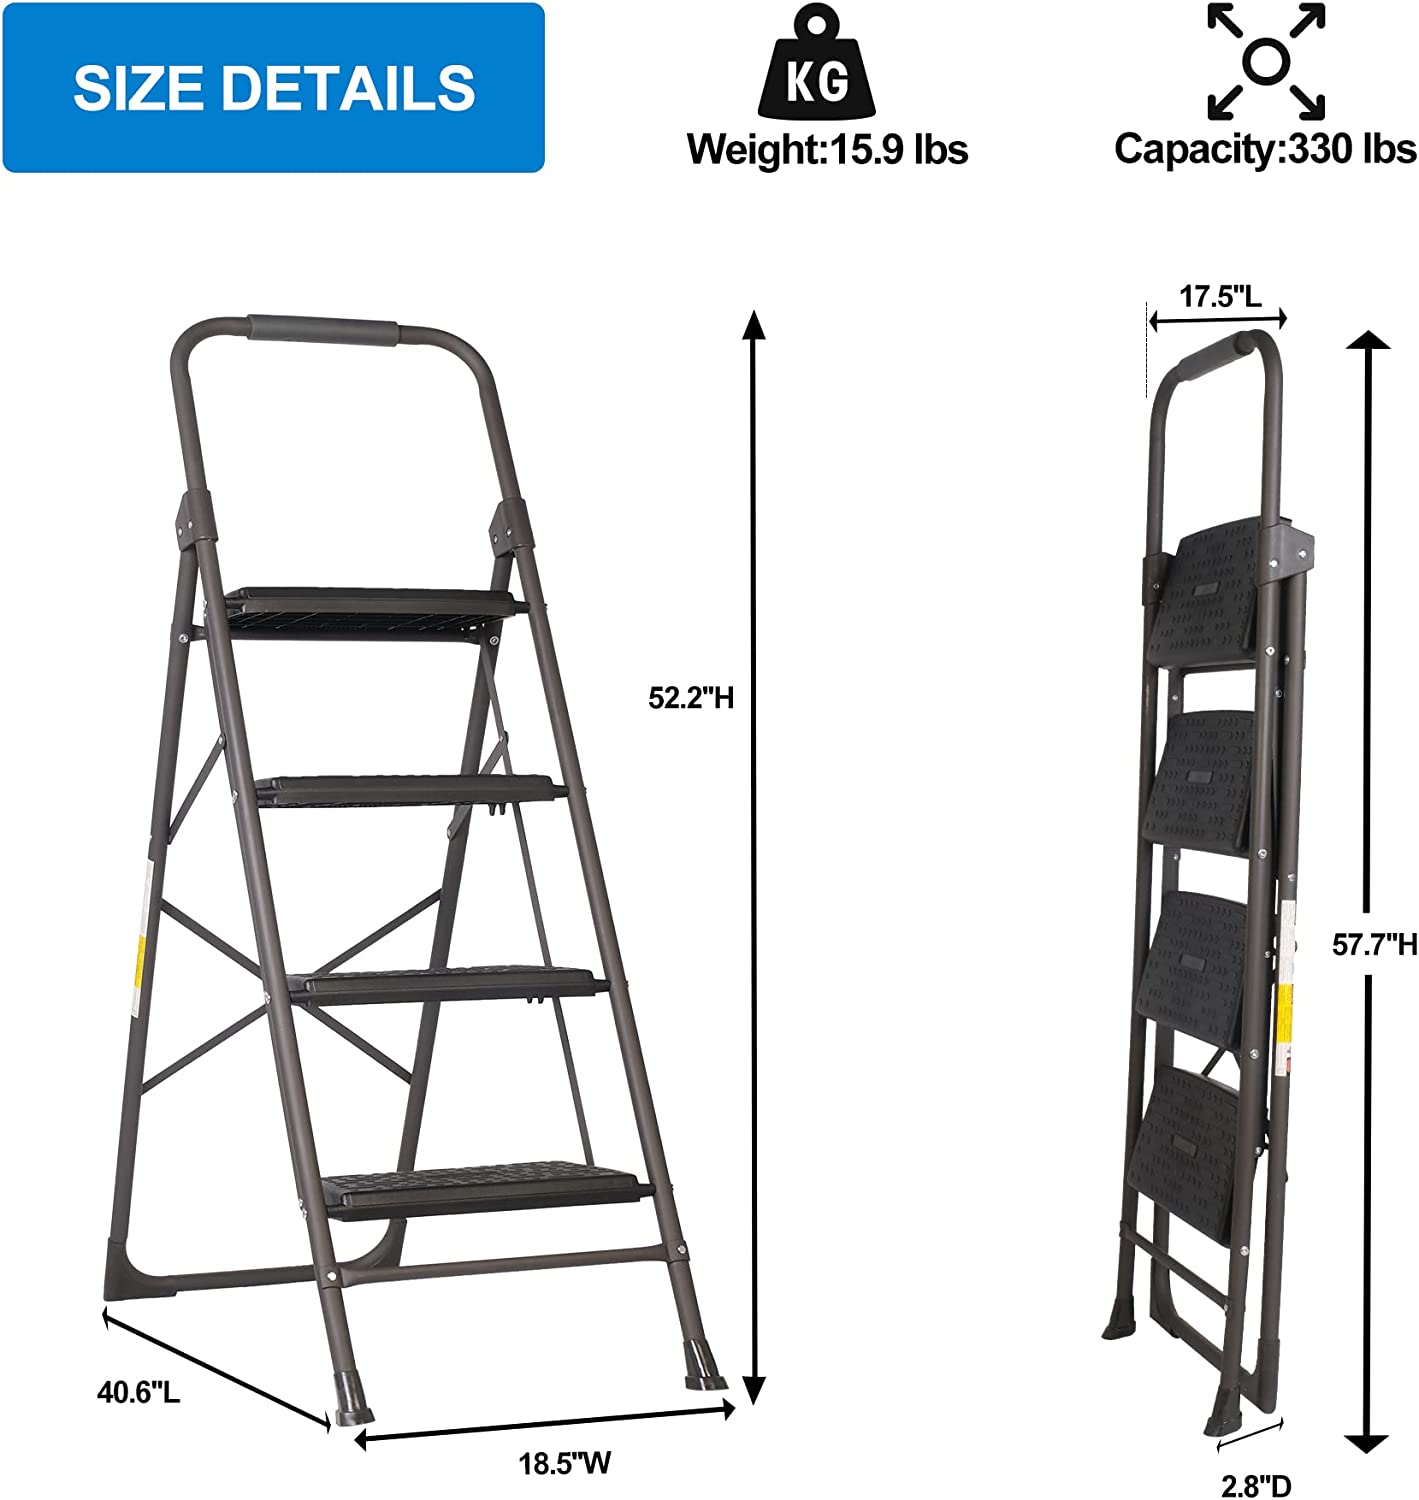 4-Step Folding Step Ladder with Wide Anti-Slip Pedal for Safety and Convenience